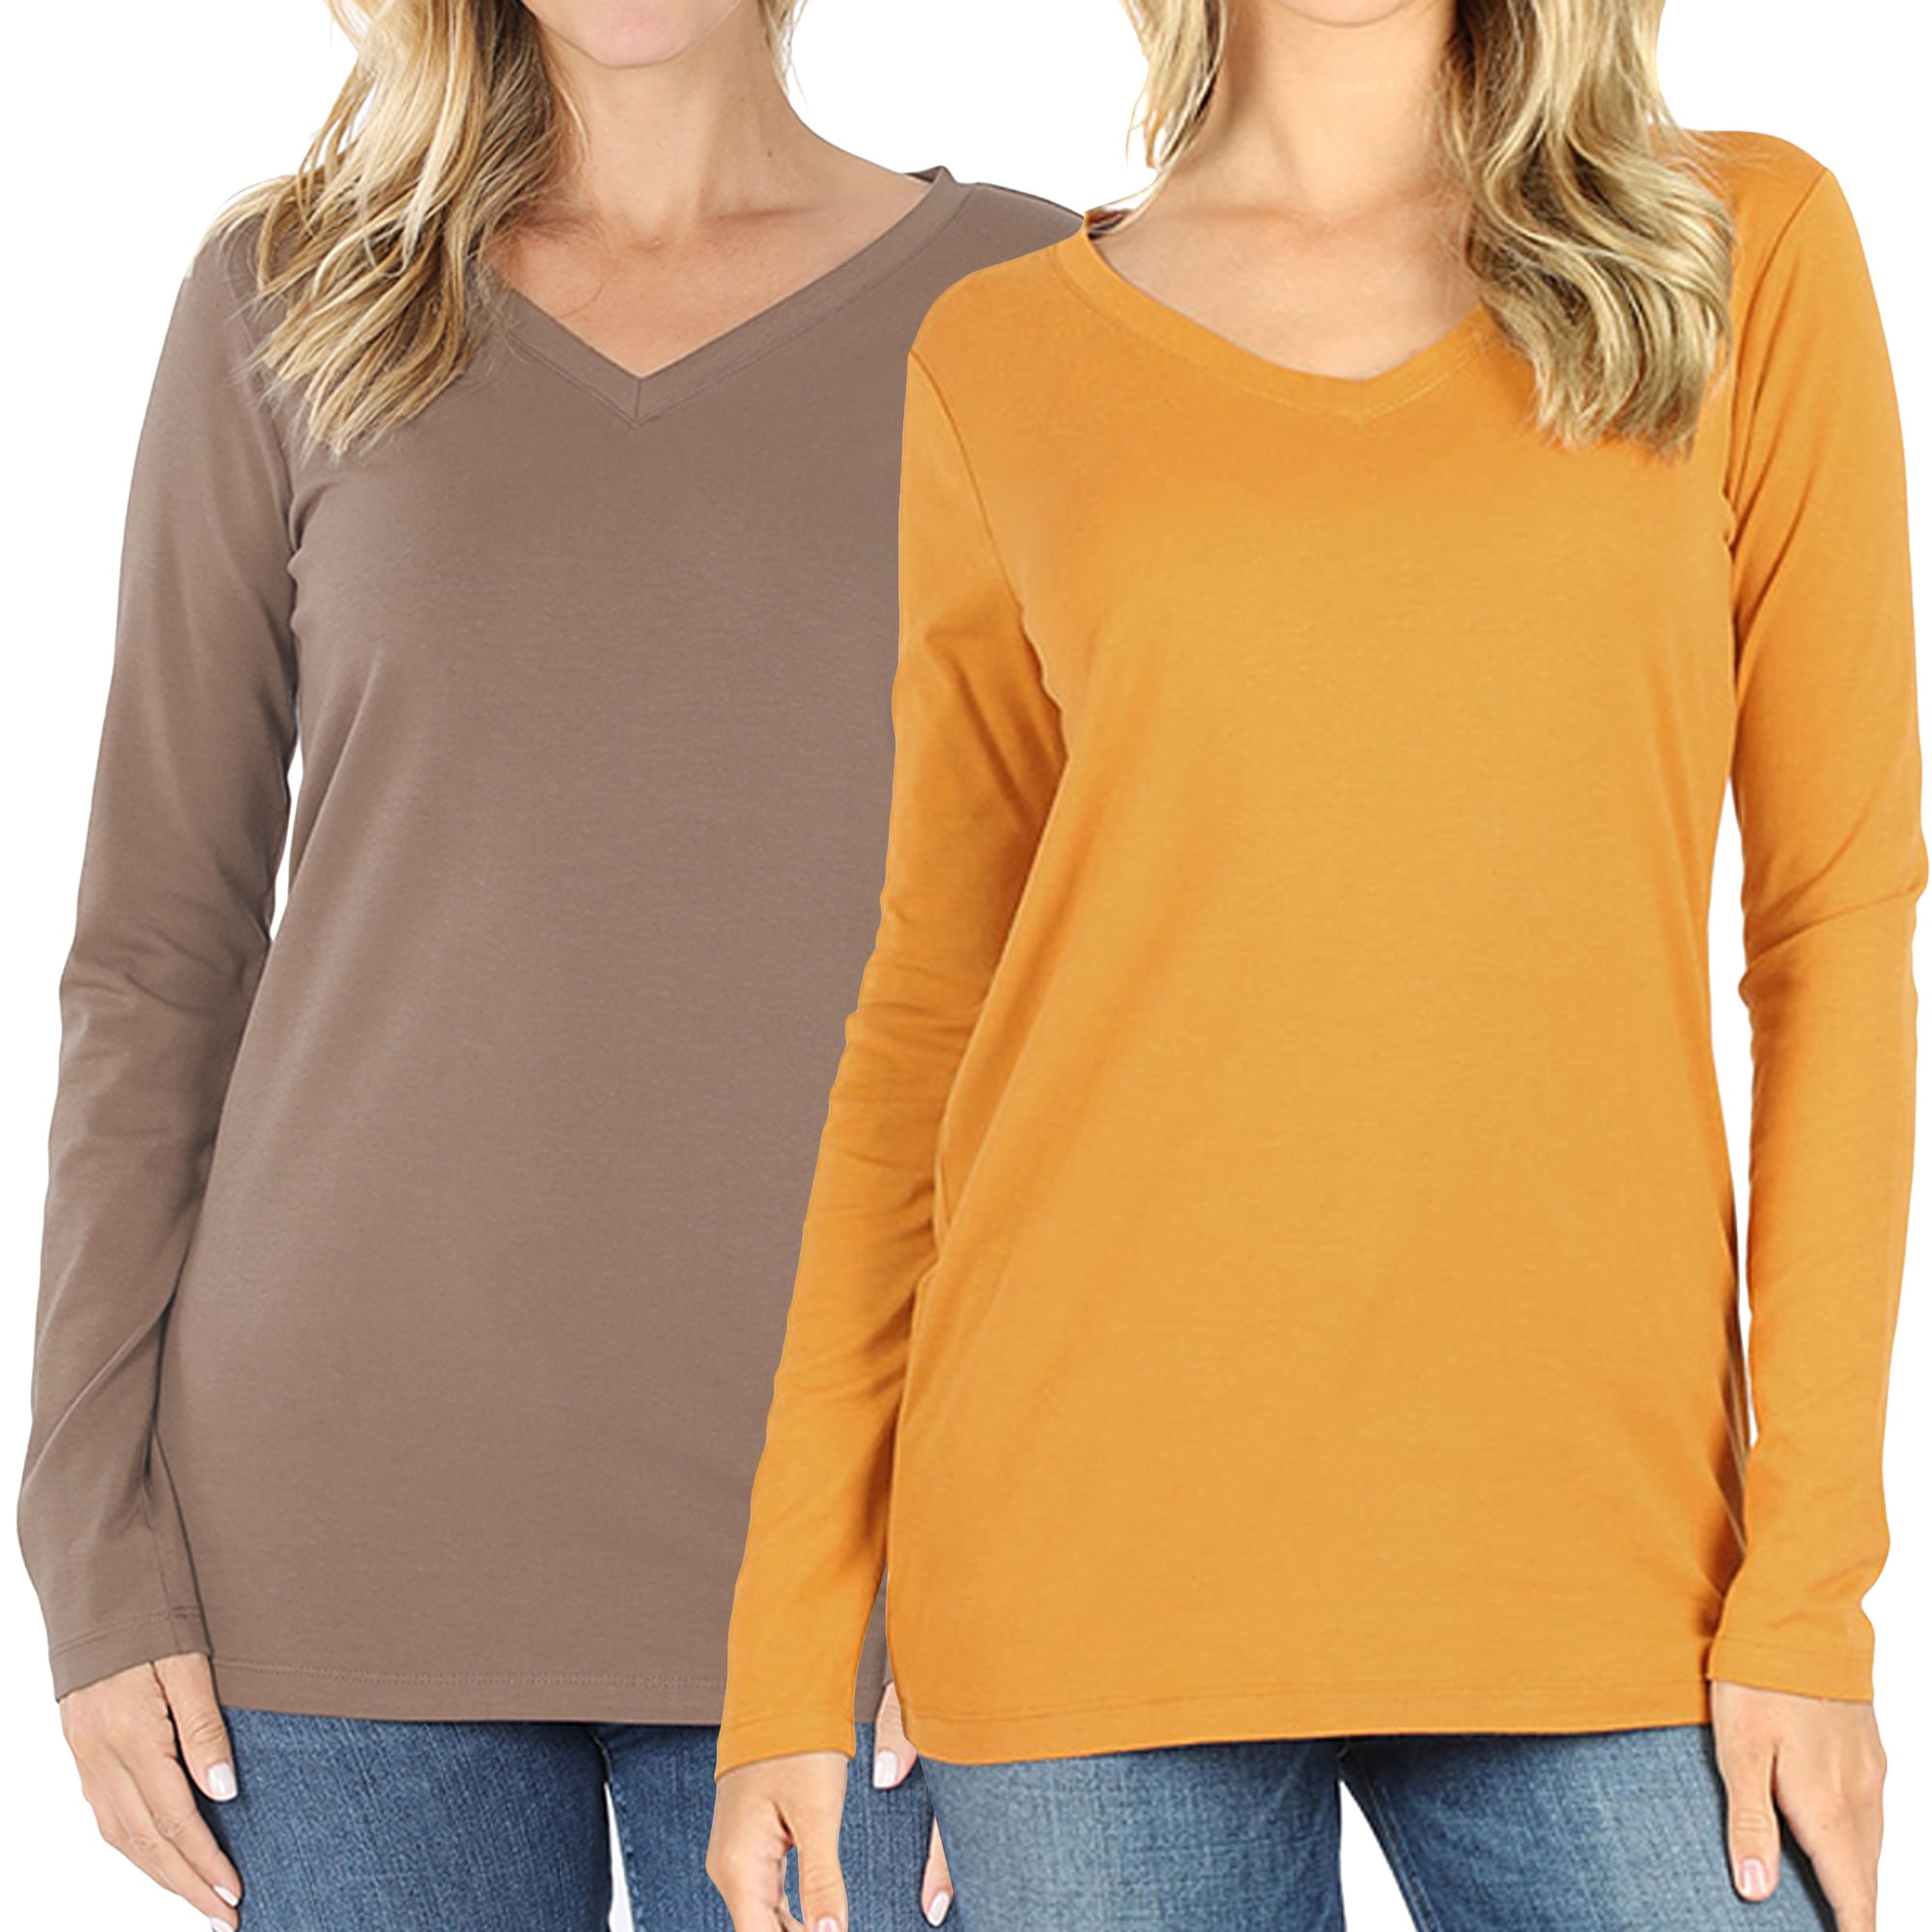 Women Basic Cotton Relaxed Fit V-Neck(S-3X) Long Sleeve T-Shirt Top ...